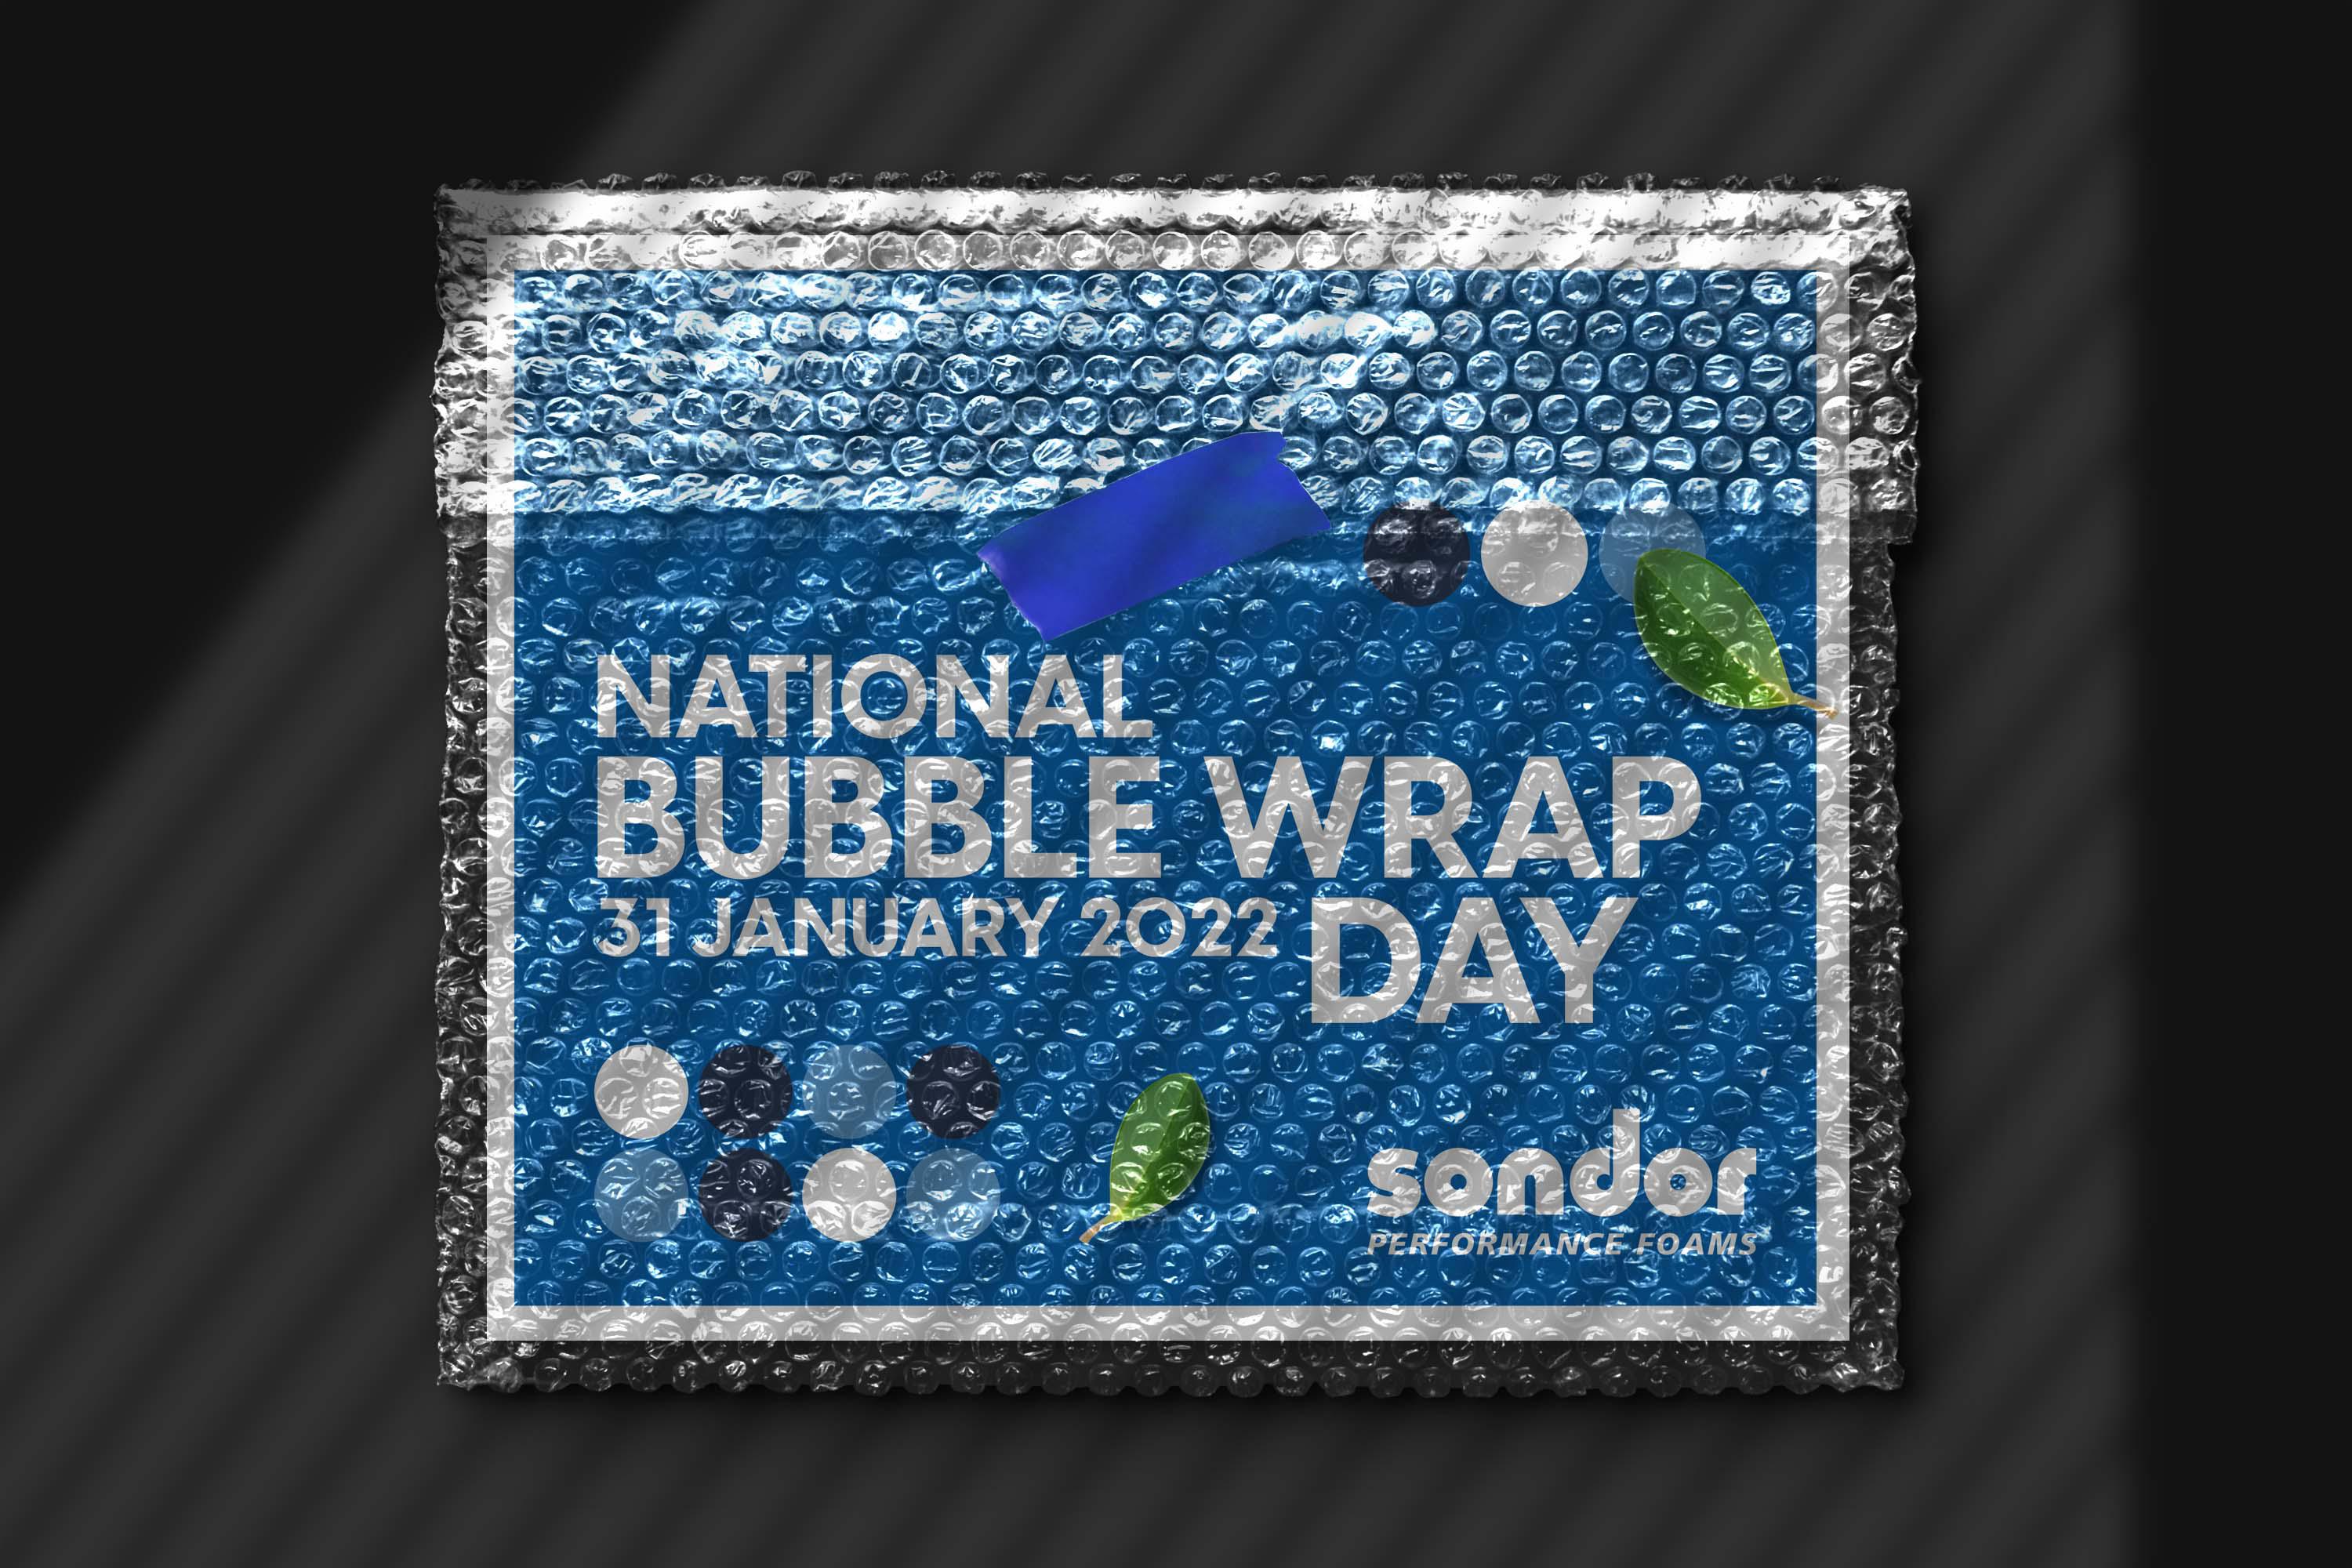 NATIONAL BUBBLE WRAP DAY